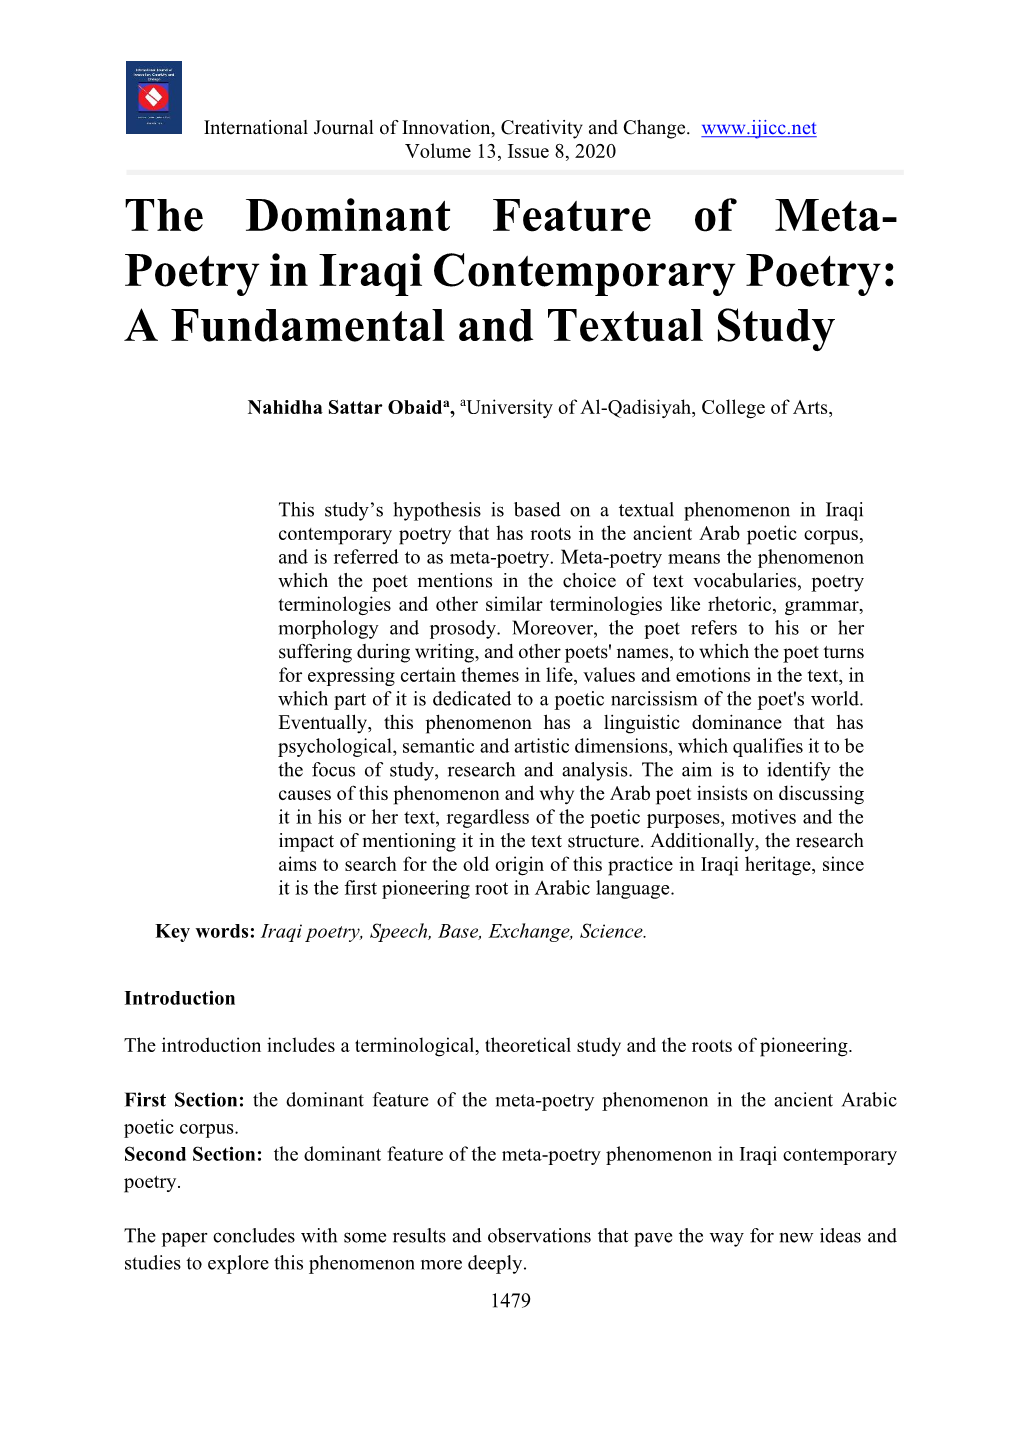 The Dominant Feature of Meta- Poetry in Iraqi Contemporary Poetry: a Fundamental and Textual Study